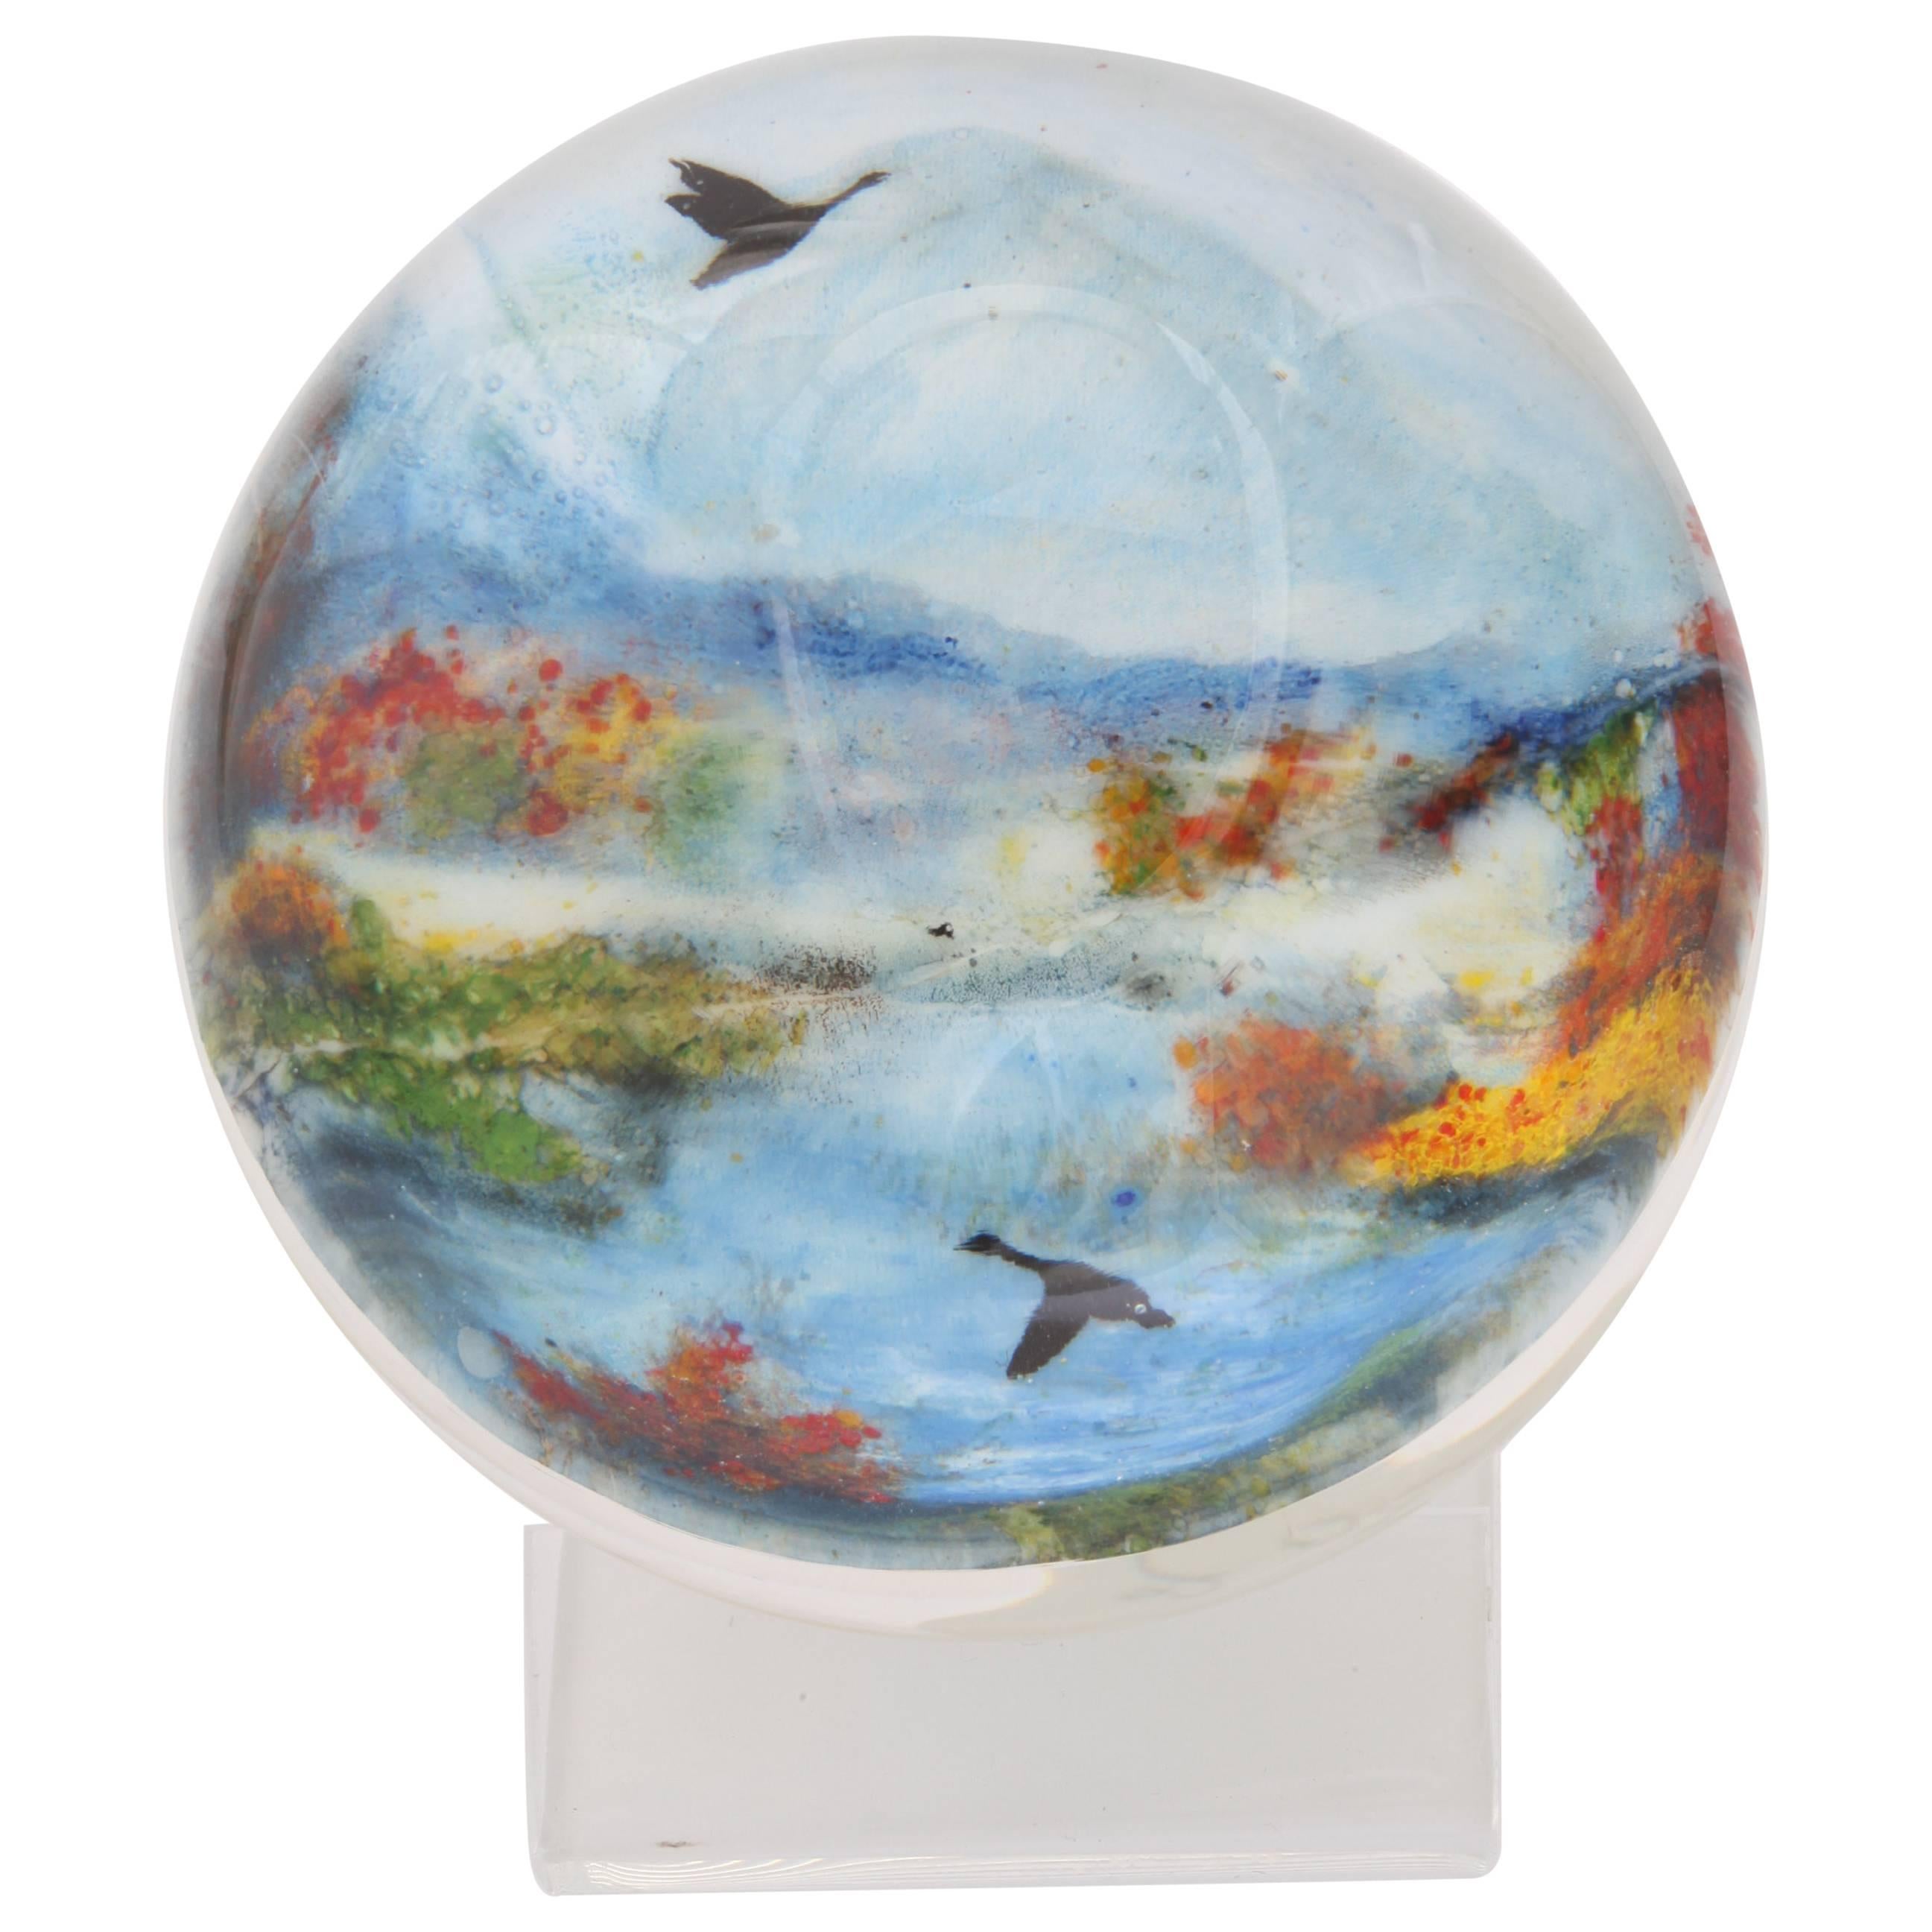 Rick Ayotte Glasscape Paperweight Titled "In Flight" For Sale